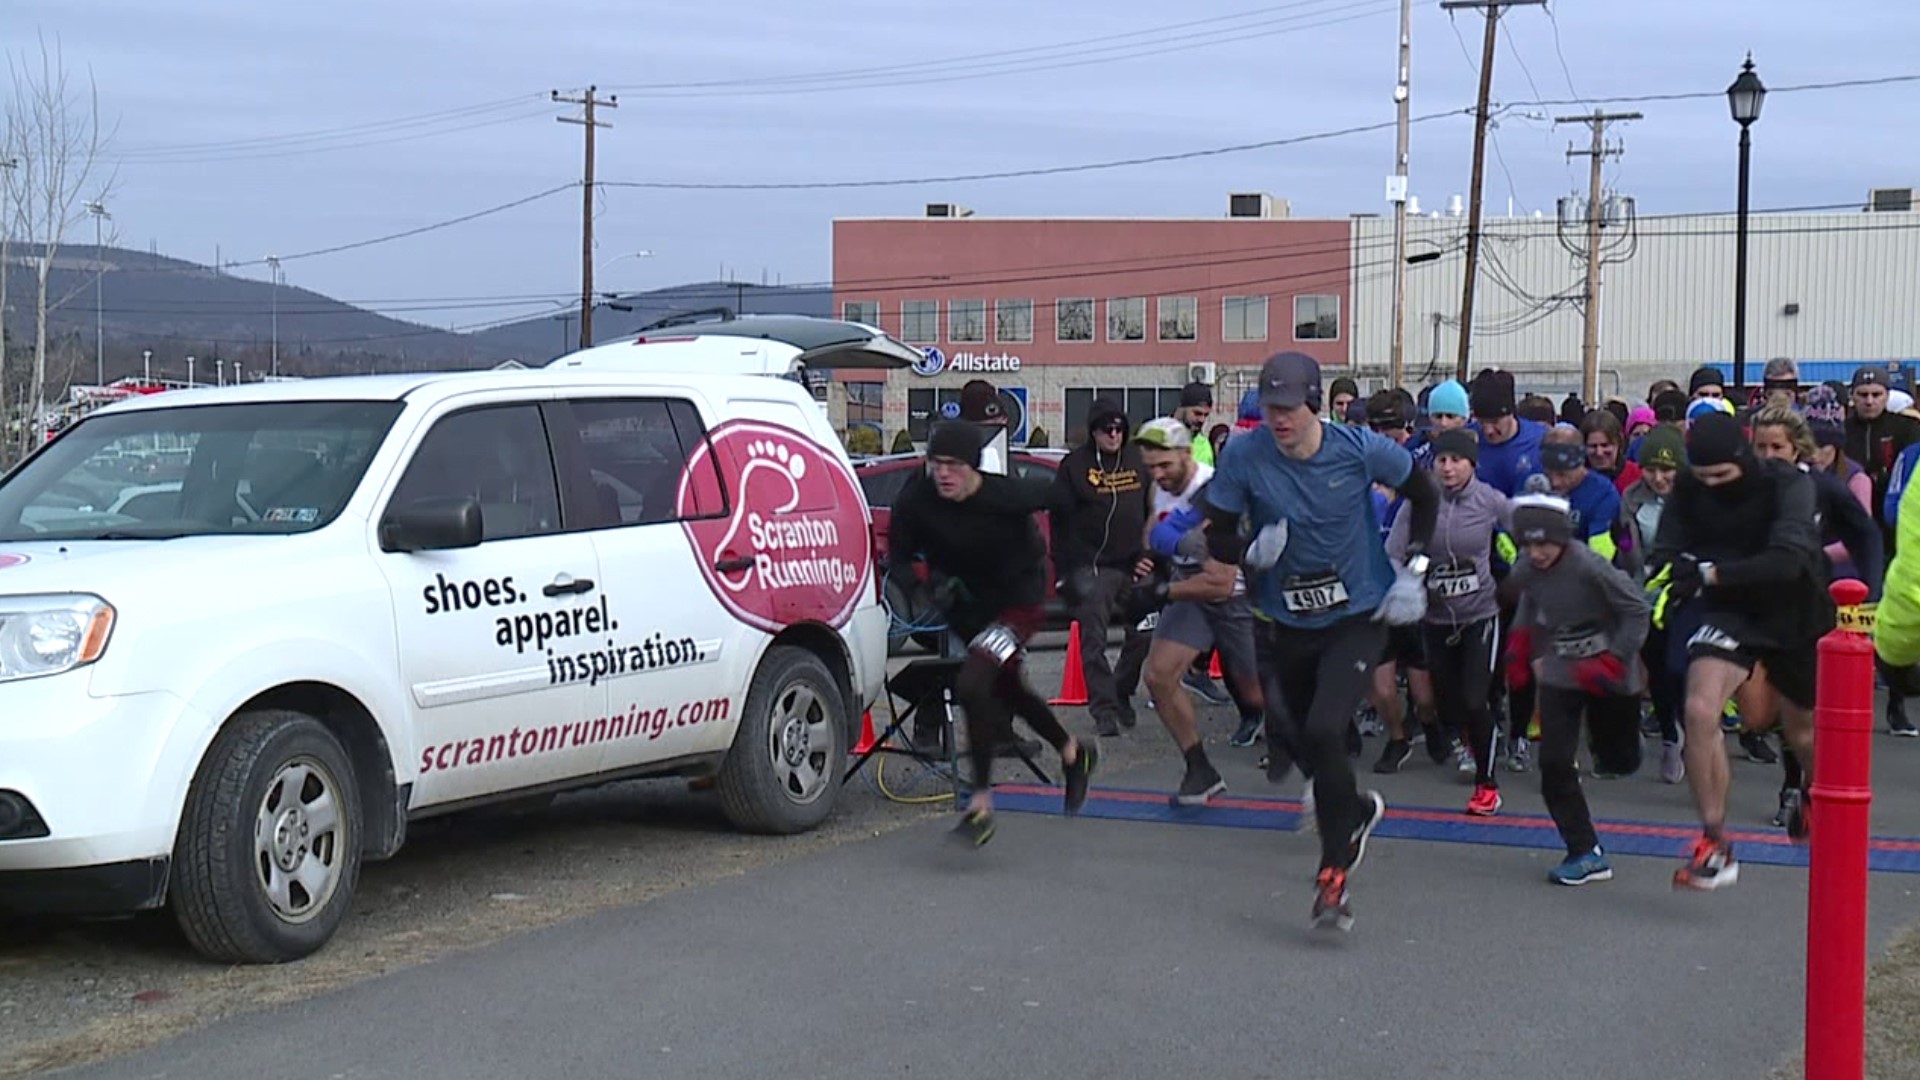 Runners are gearing up for an annual race in Scranton. It's back after a year off due to the pandemic.